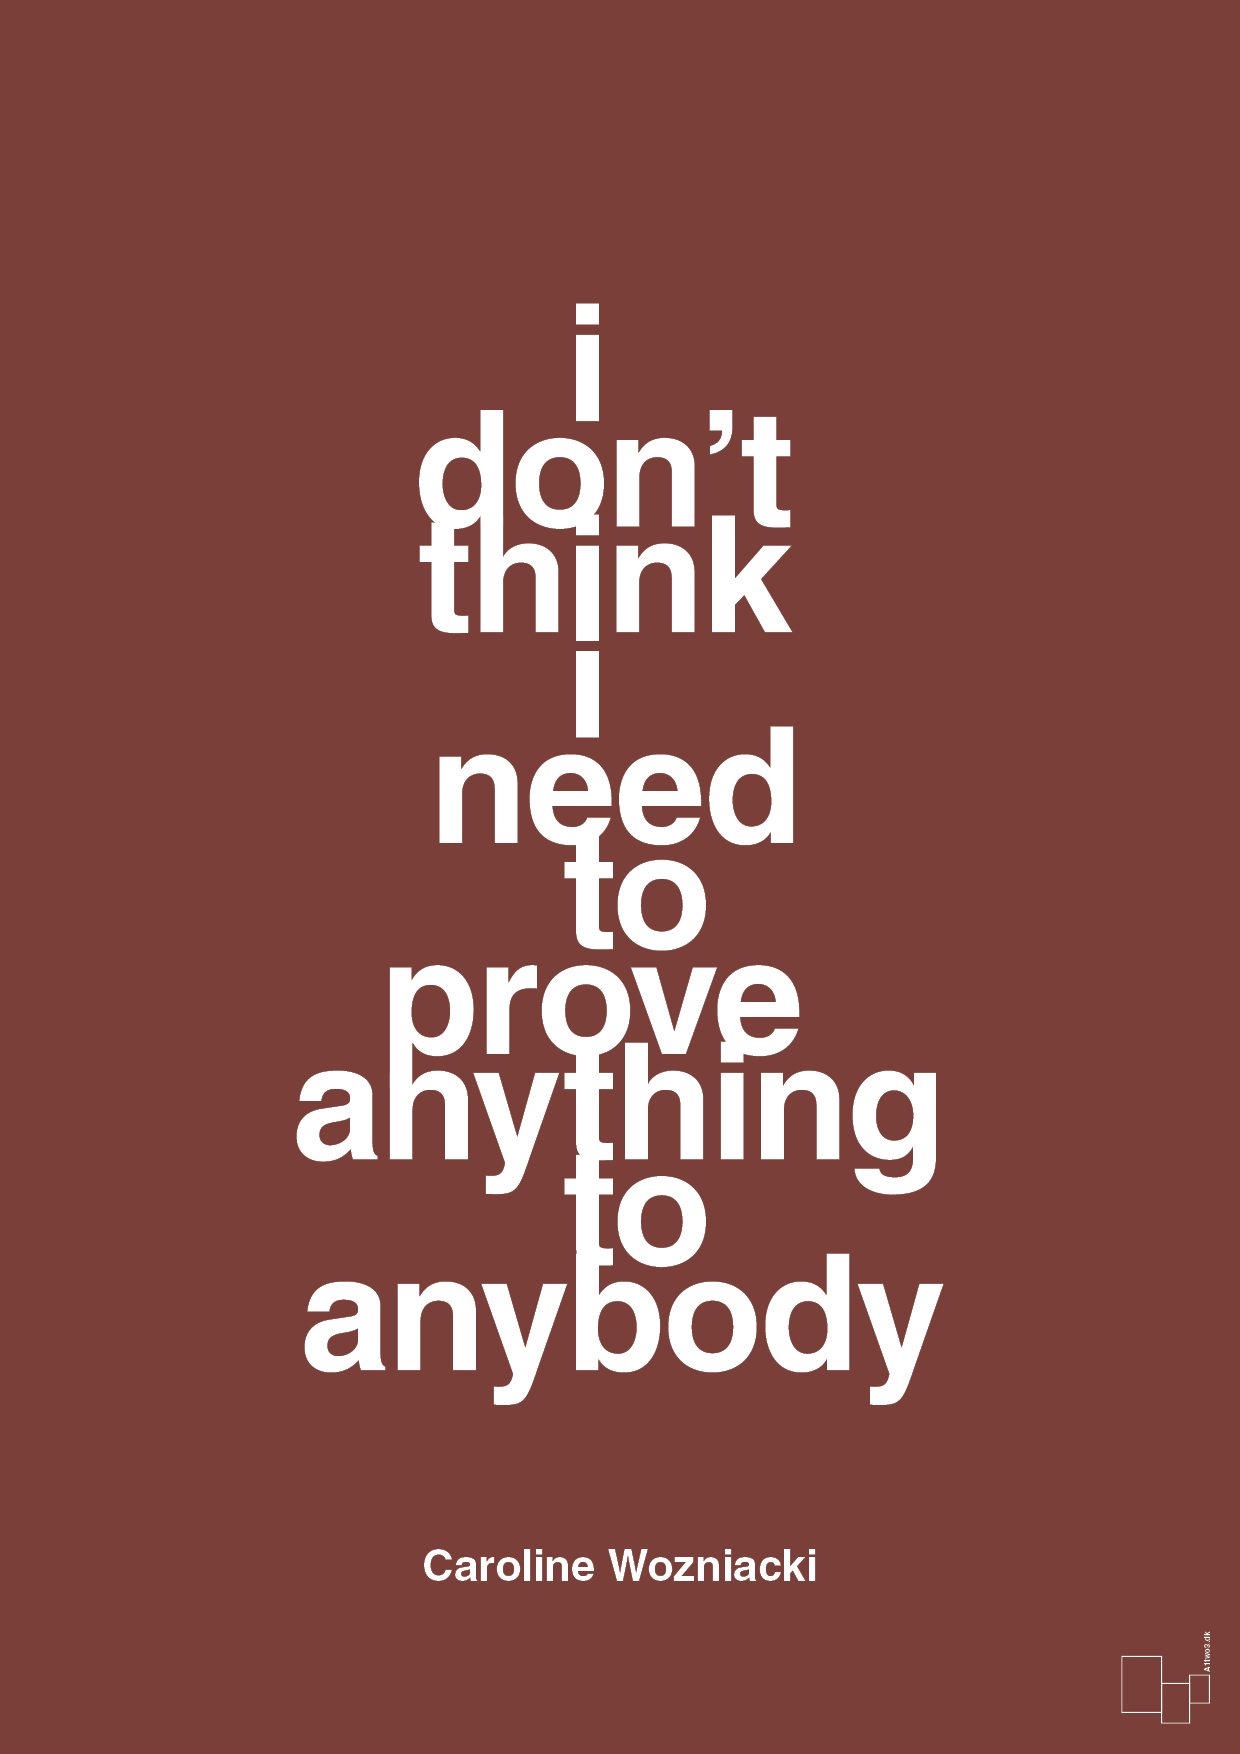 i don’t think i need to prove anything to anybody - Plakat med Citater i Red Pepper